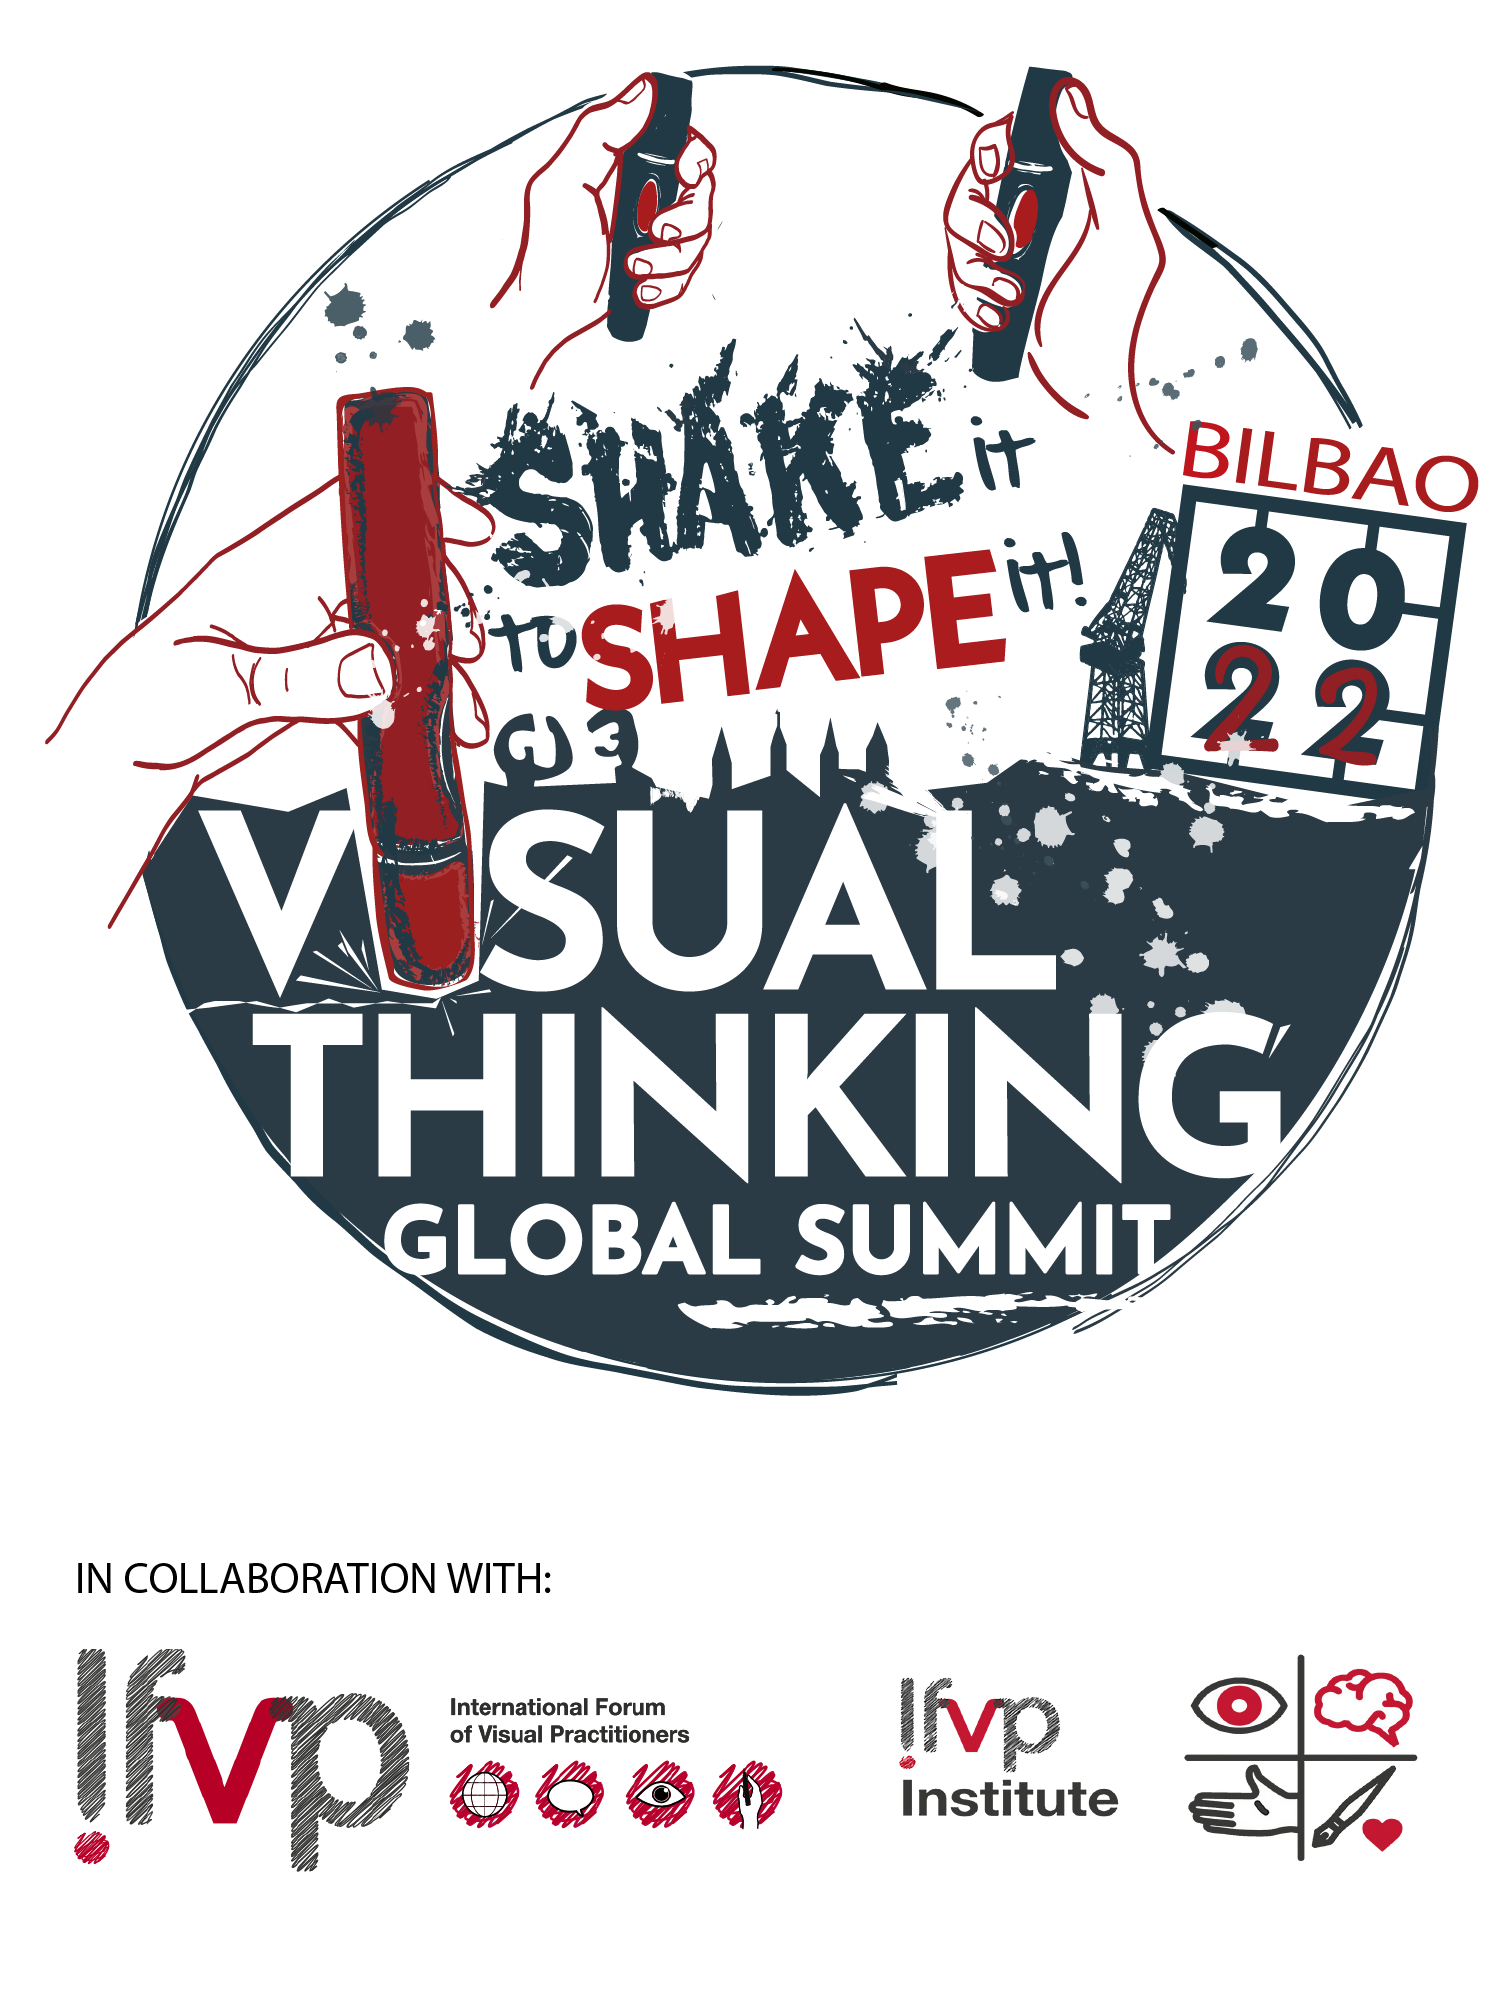 We are at the Visual Thinking Global Summit